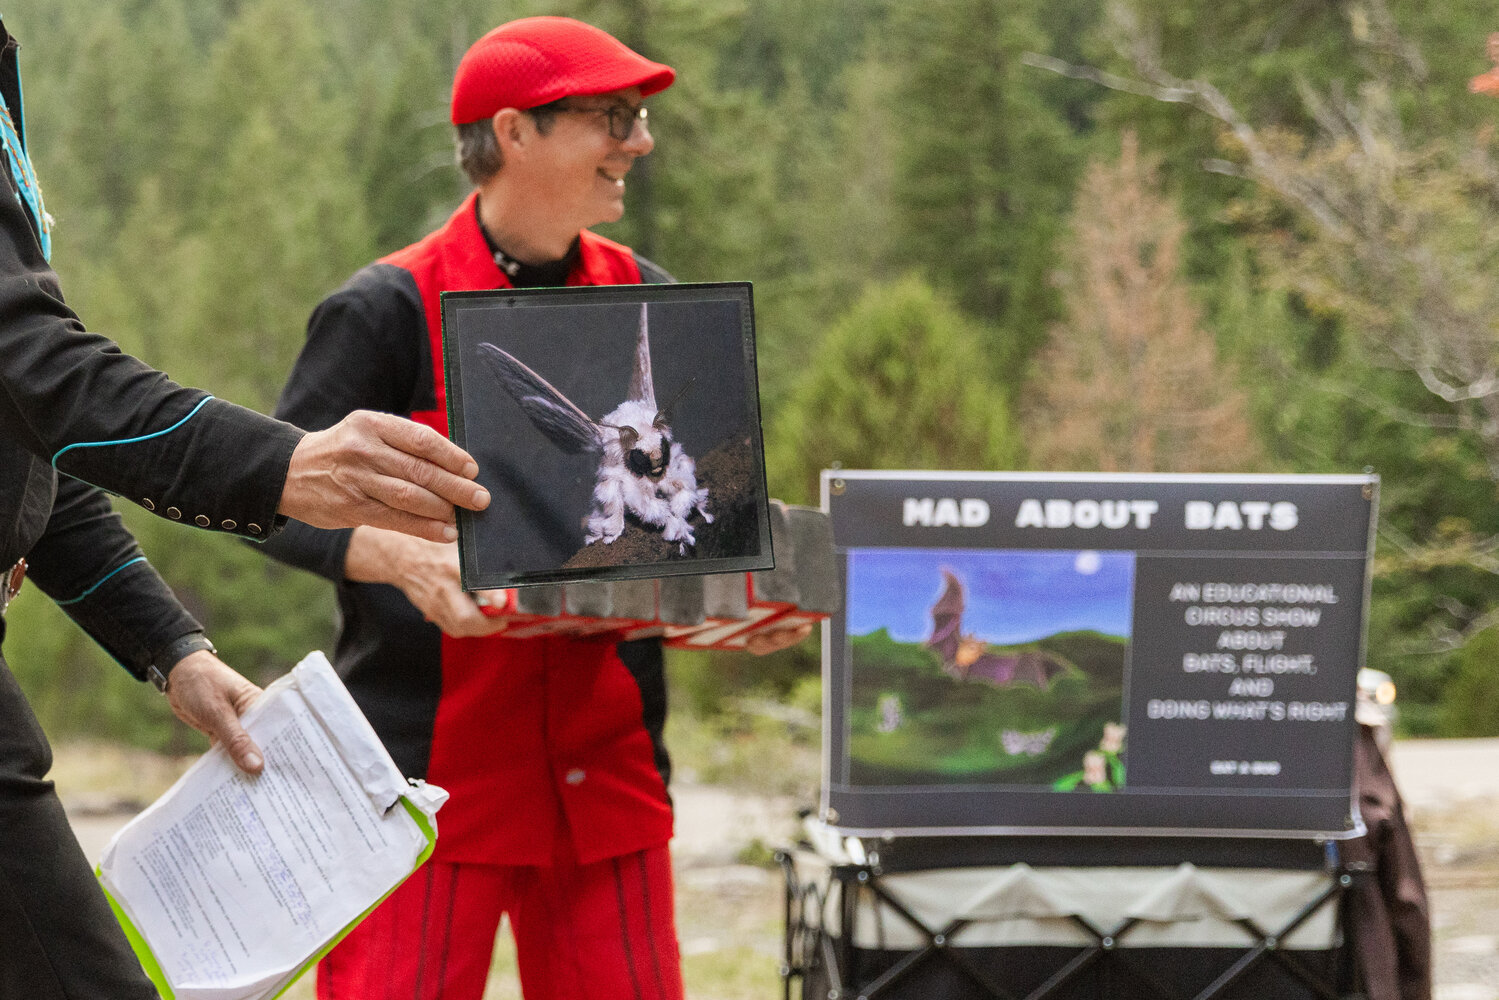 Pictures of moths are displayed during a Vaudeville-esque show at Mount Rainier National Park on Tuesday, Sept. 12.